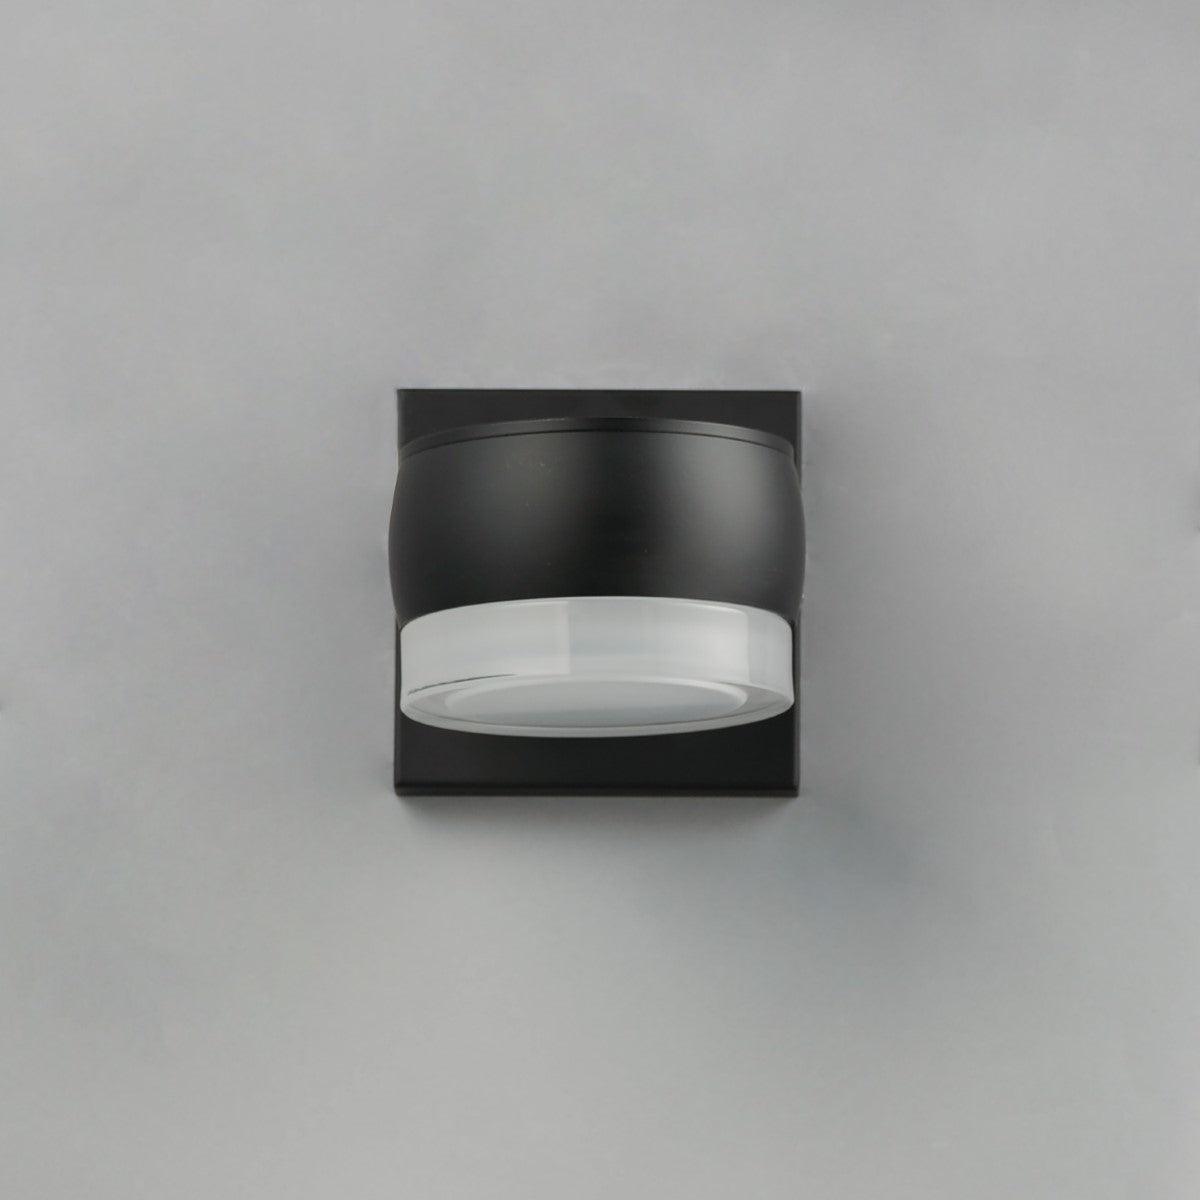 Modular 5 in. LED Outdoor Wall Sconce 3000K Black Finish